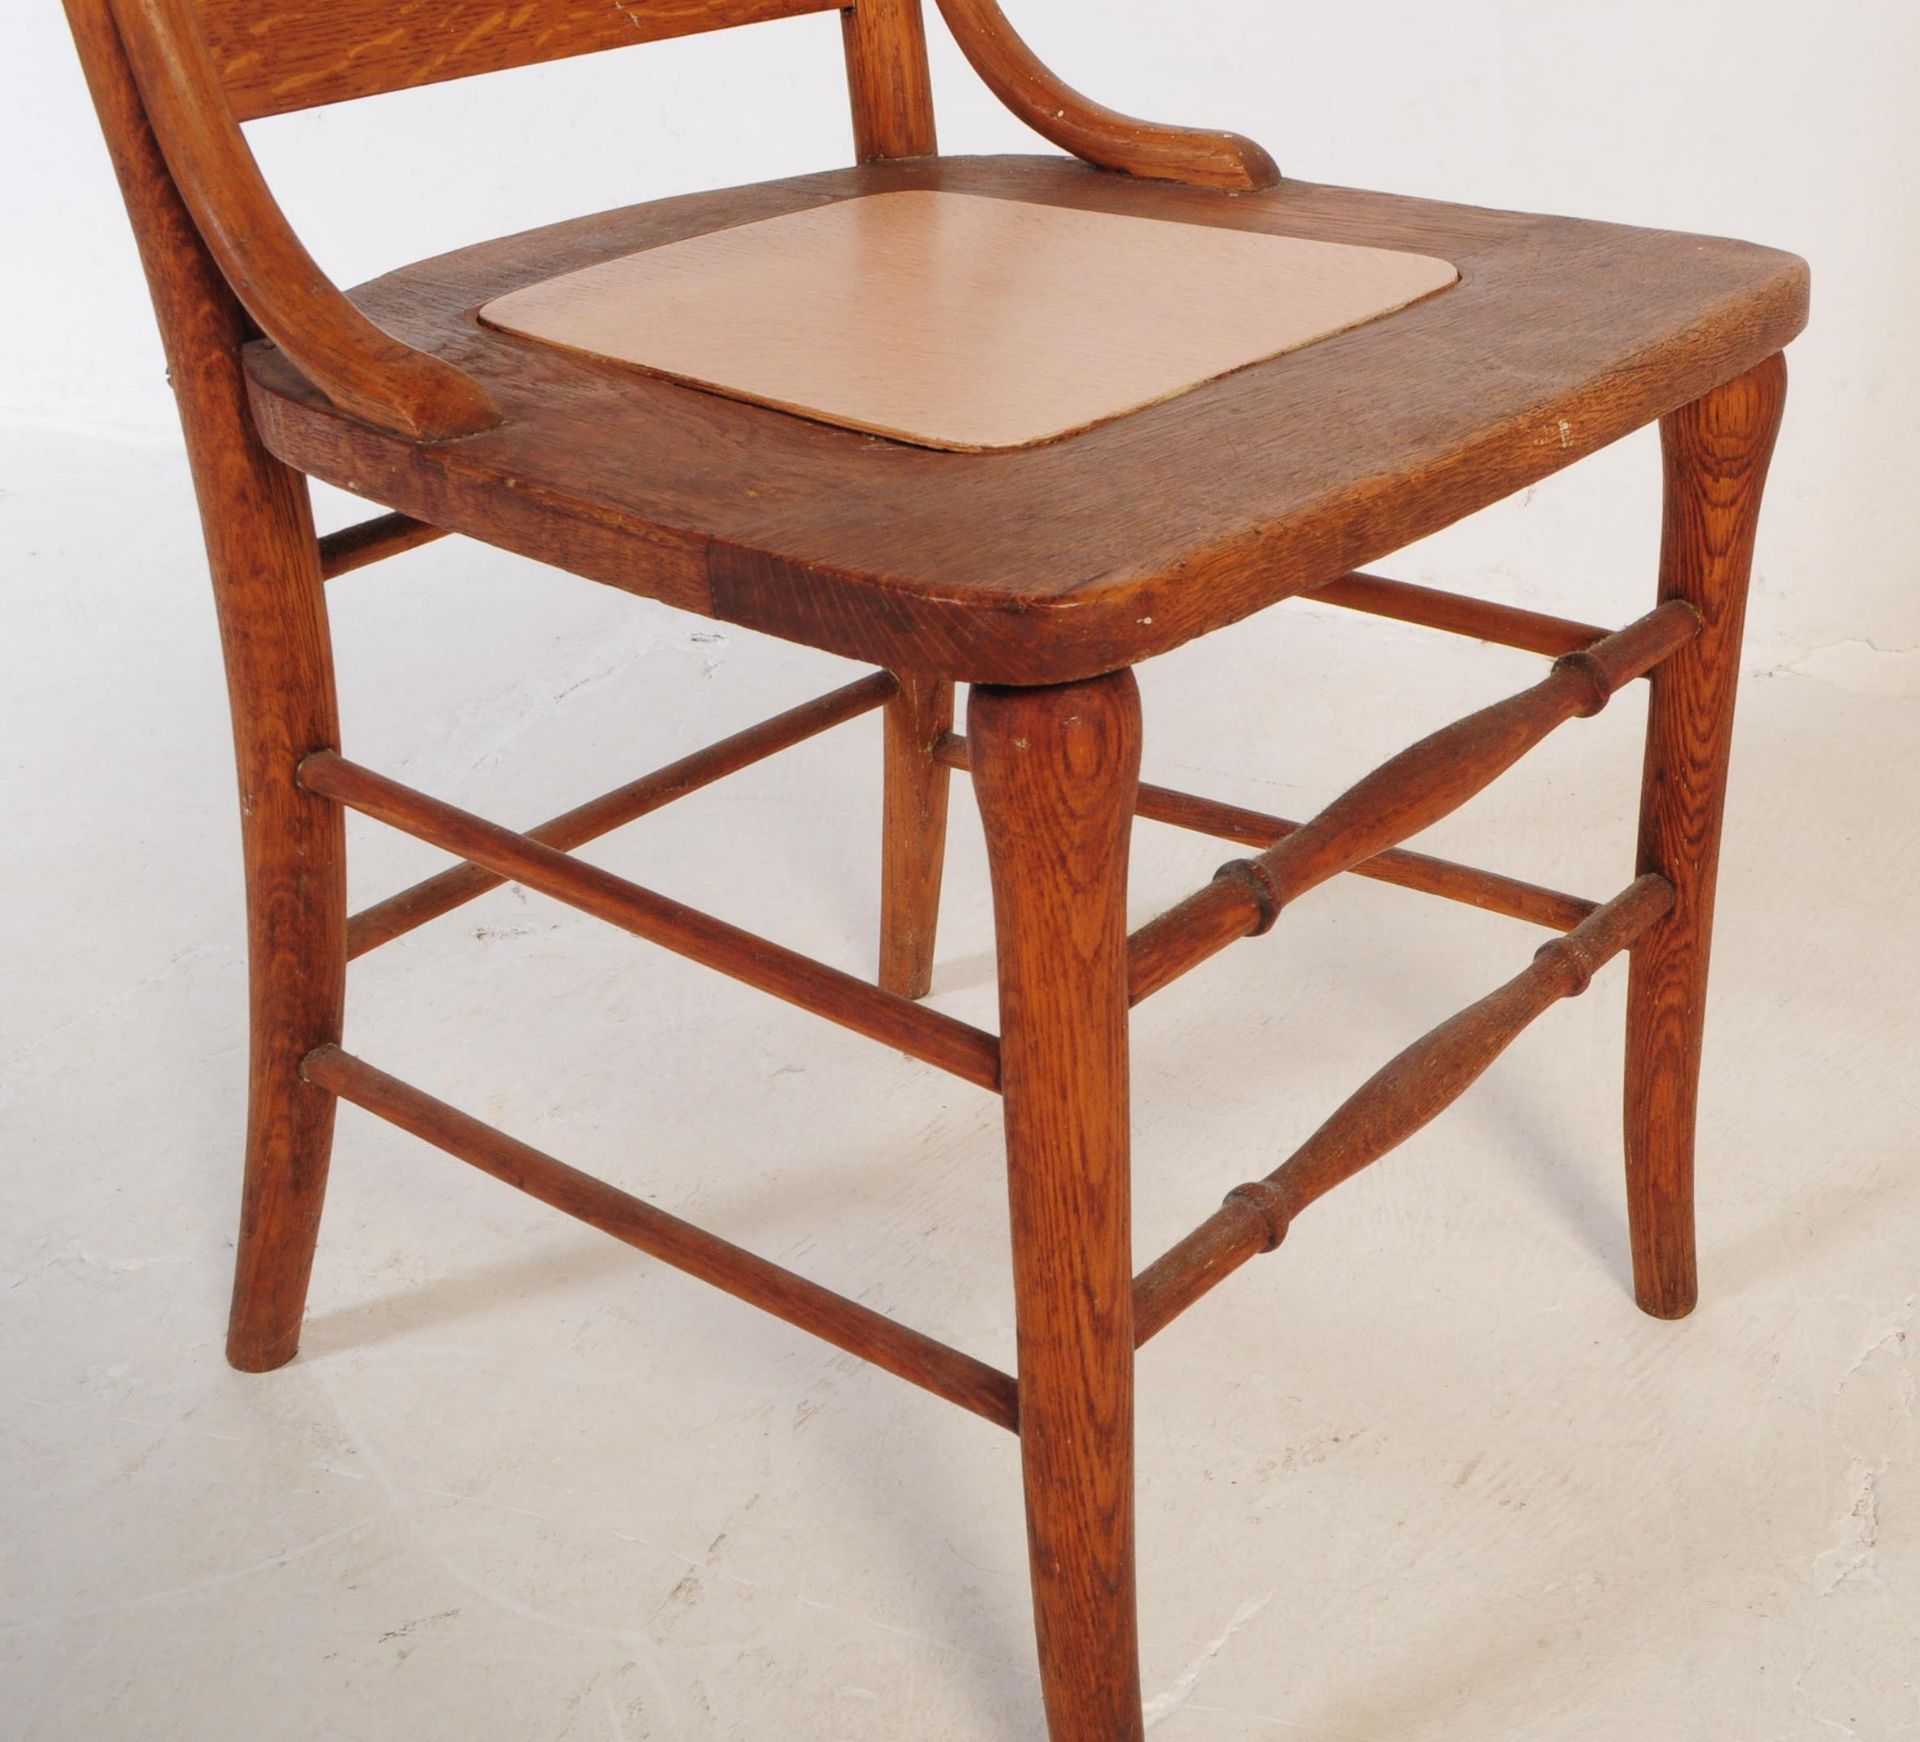 EARLY 20TH CENTURY ARTS & CRAFTS OAK HALL ARMCHAIR - Image 16 of 16